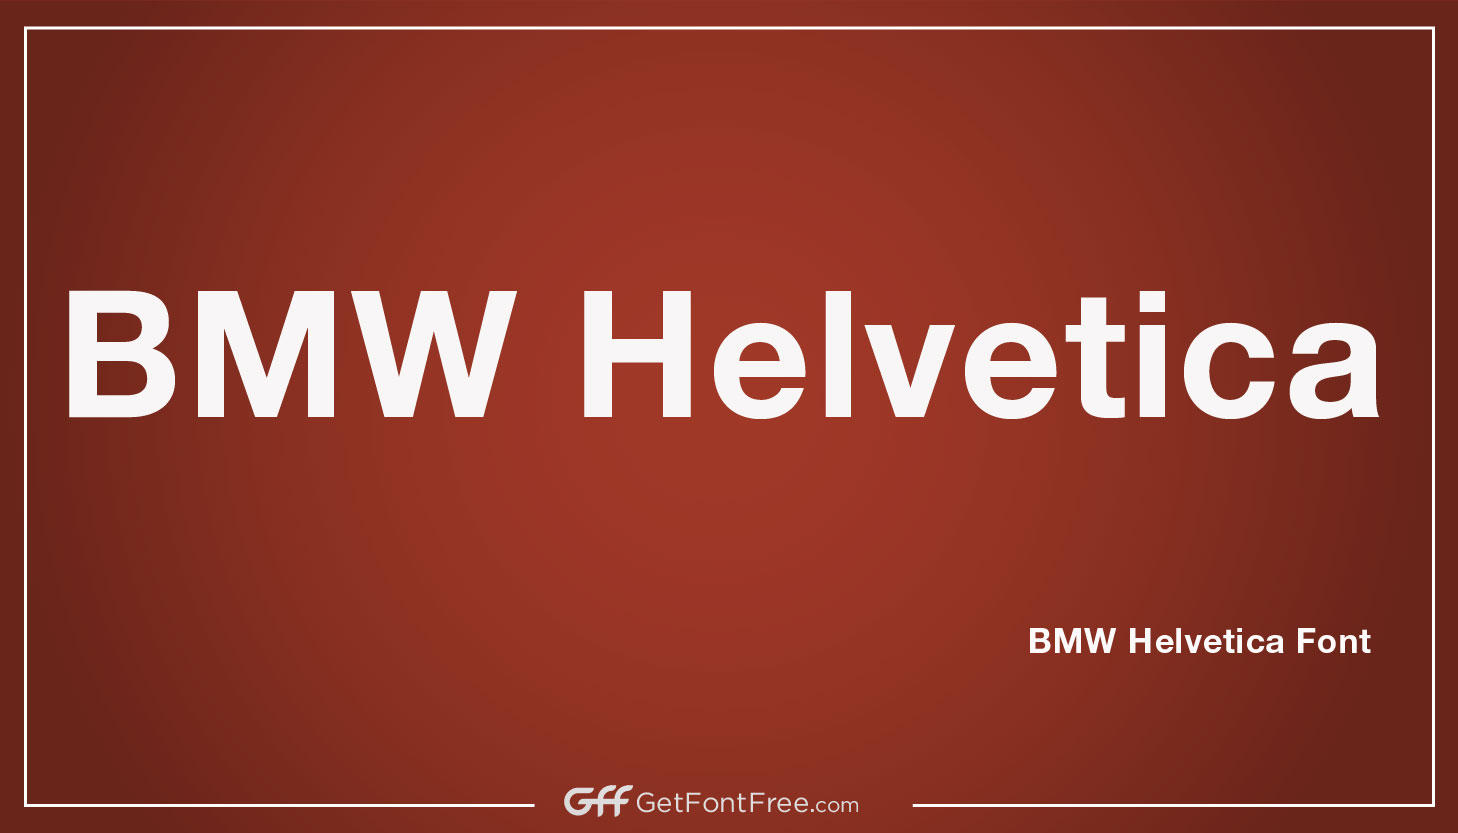 The BMW Helvetica Font is a custom typeface created by the German car manufacturer BMW for use in their branding and marketing materials. The font is based on the popular Helvetica typeface but has been modified to include certain unique characteristics that are specific to the BMW brand. The font is used in a variety of applications, including advertising, brochures, and on the company's website.